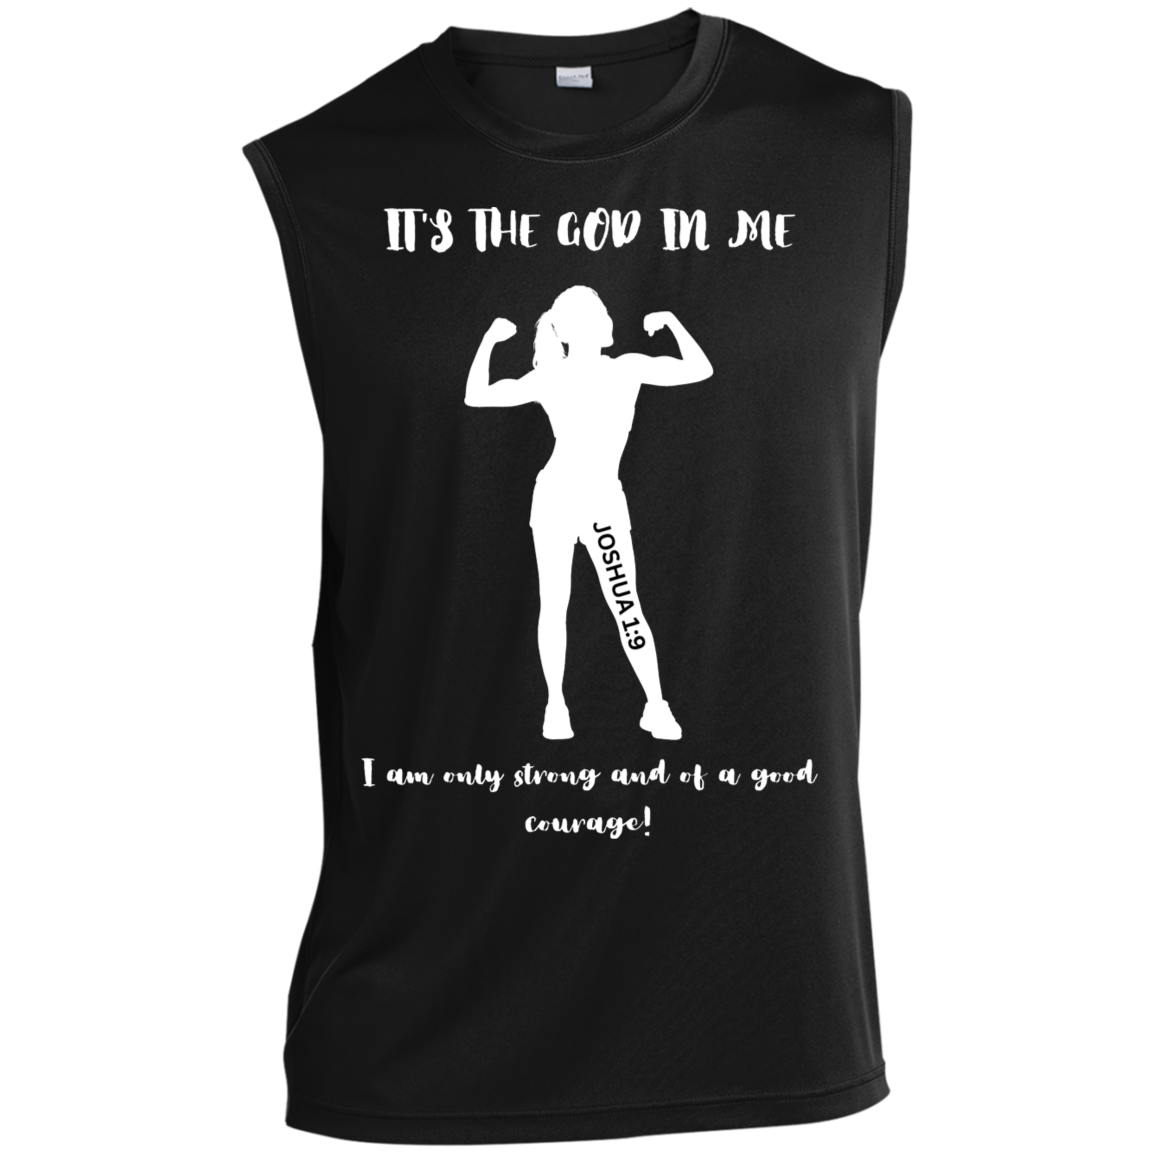 It's the God in me Sleeveless Performance Tee